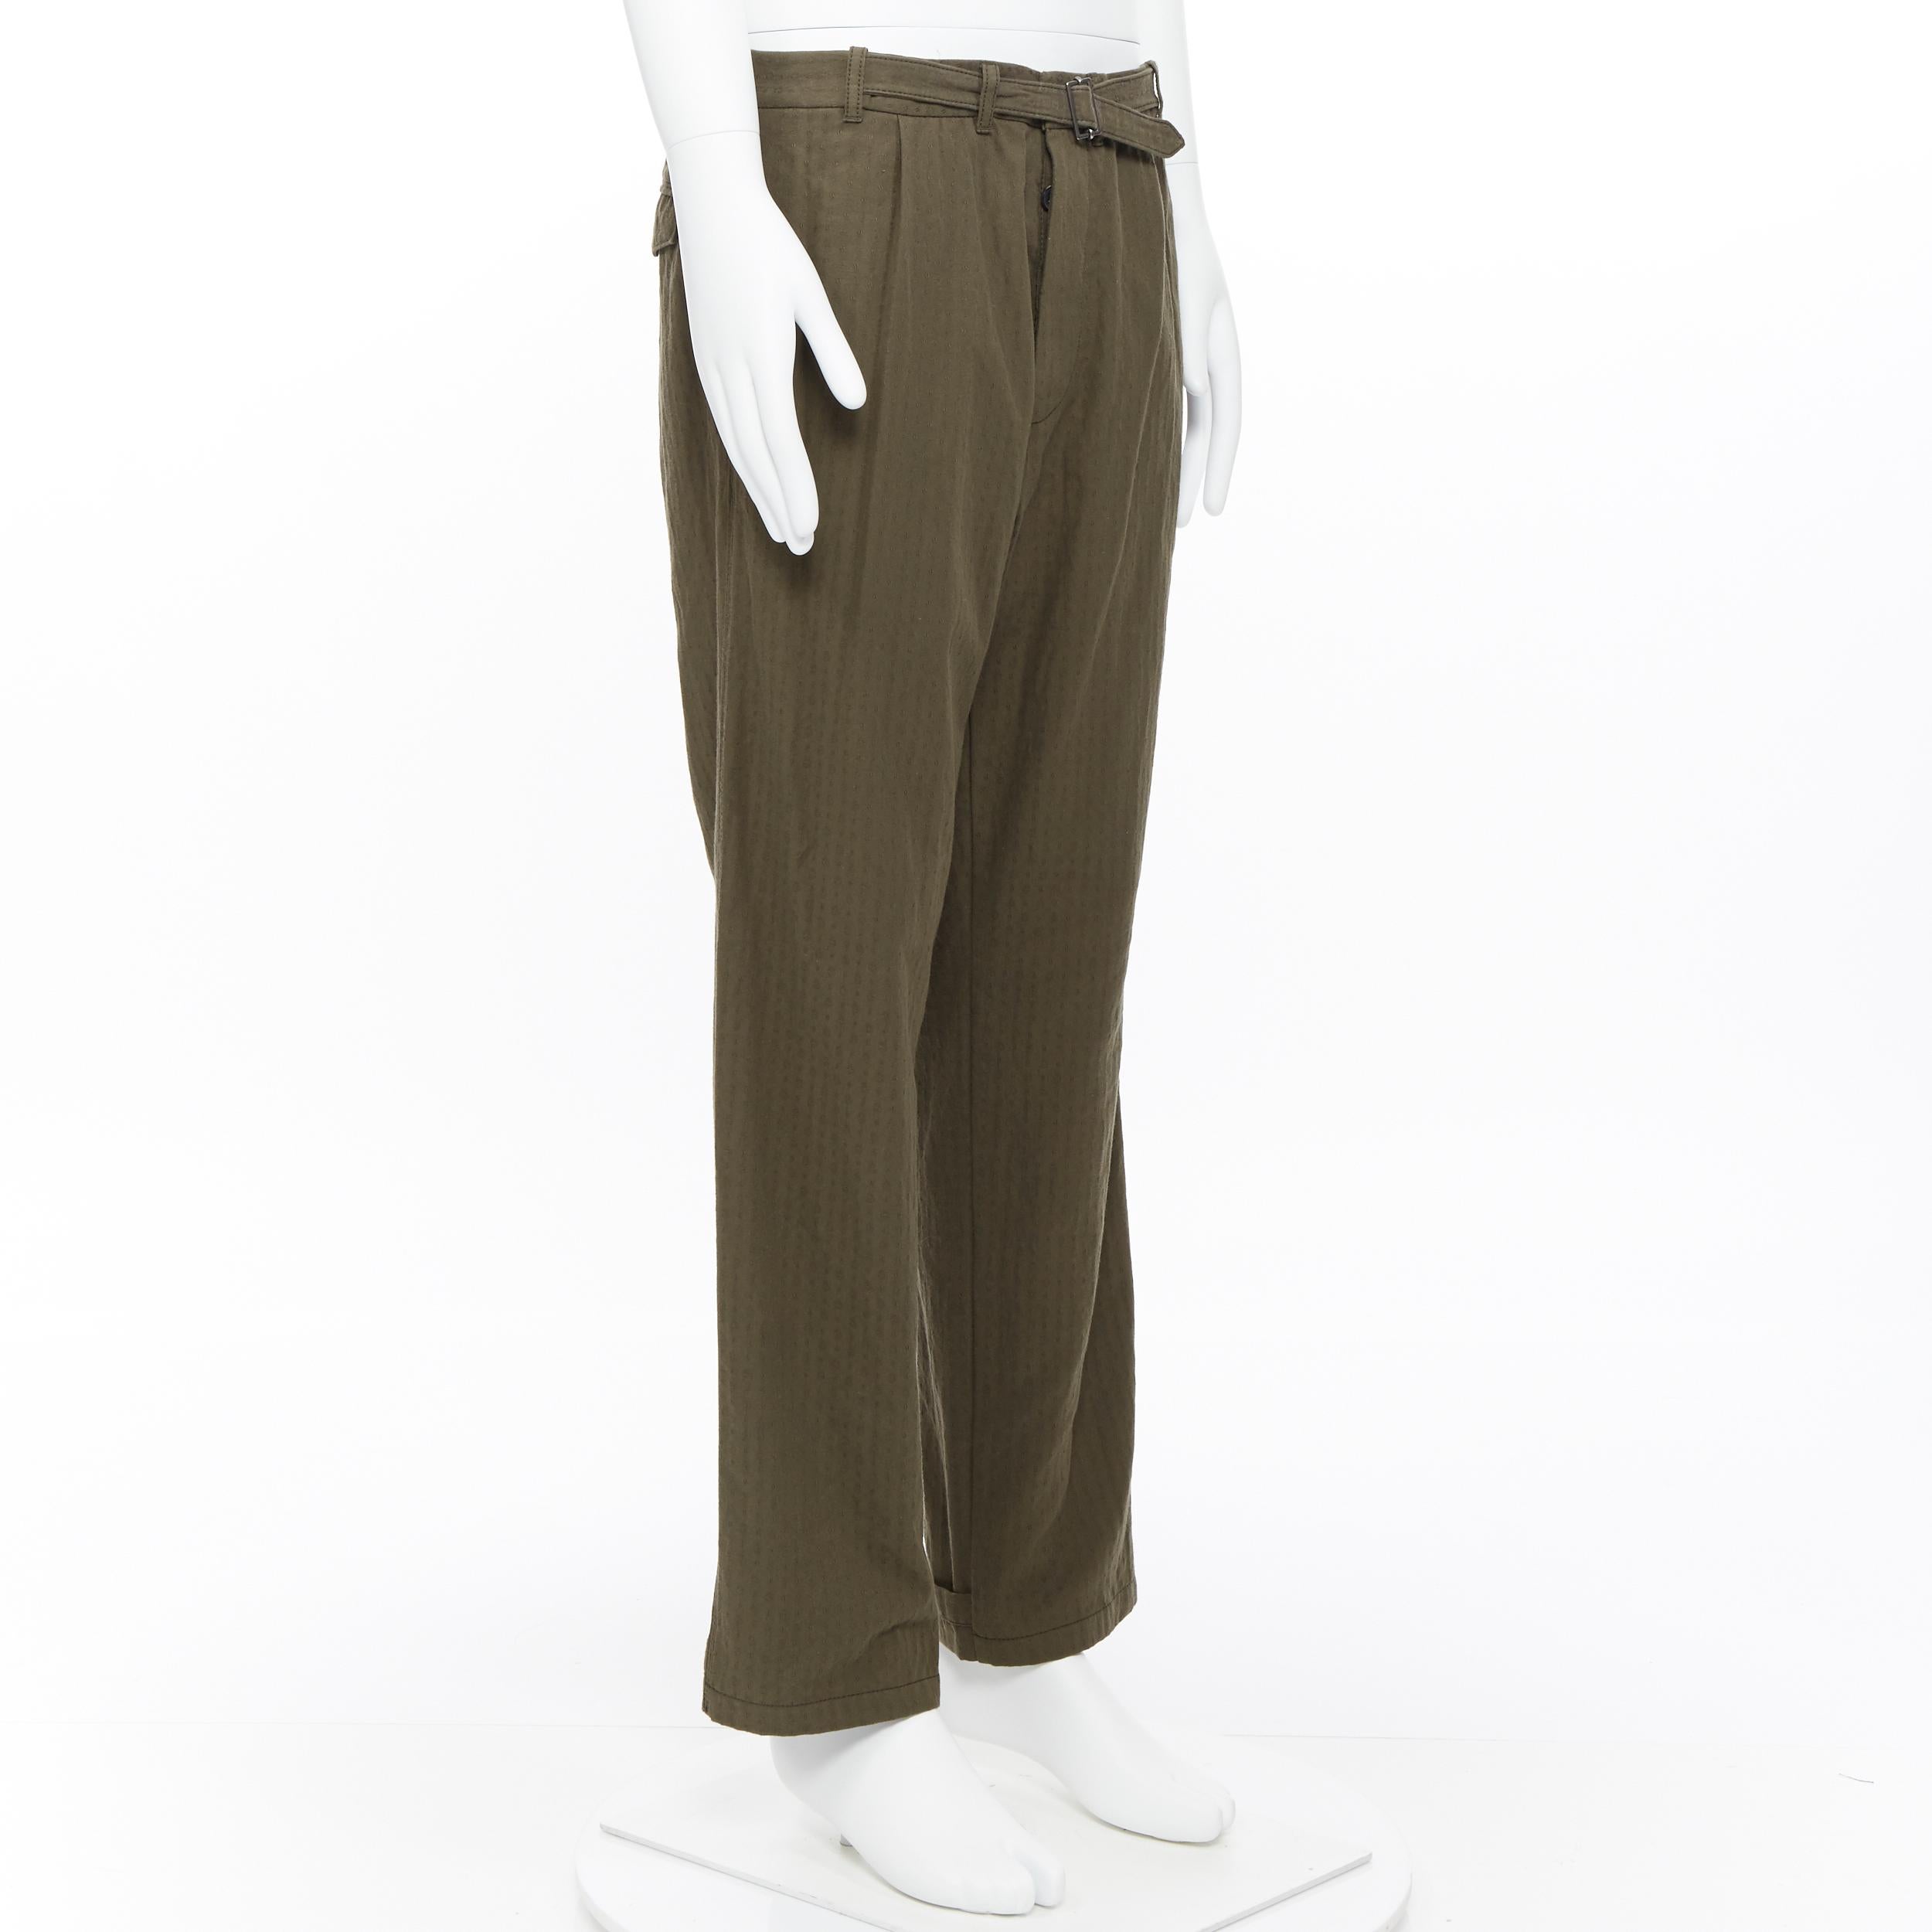 Beige new HAIDER ACKERMANN khaki green cotton dotted jacquard belted pants FR44 34